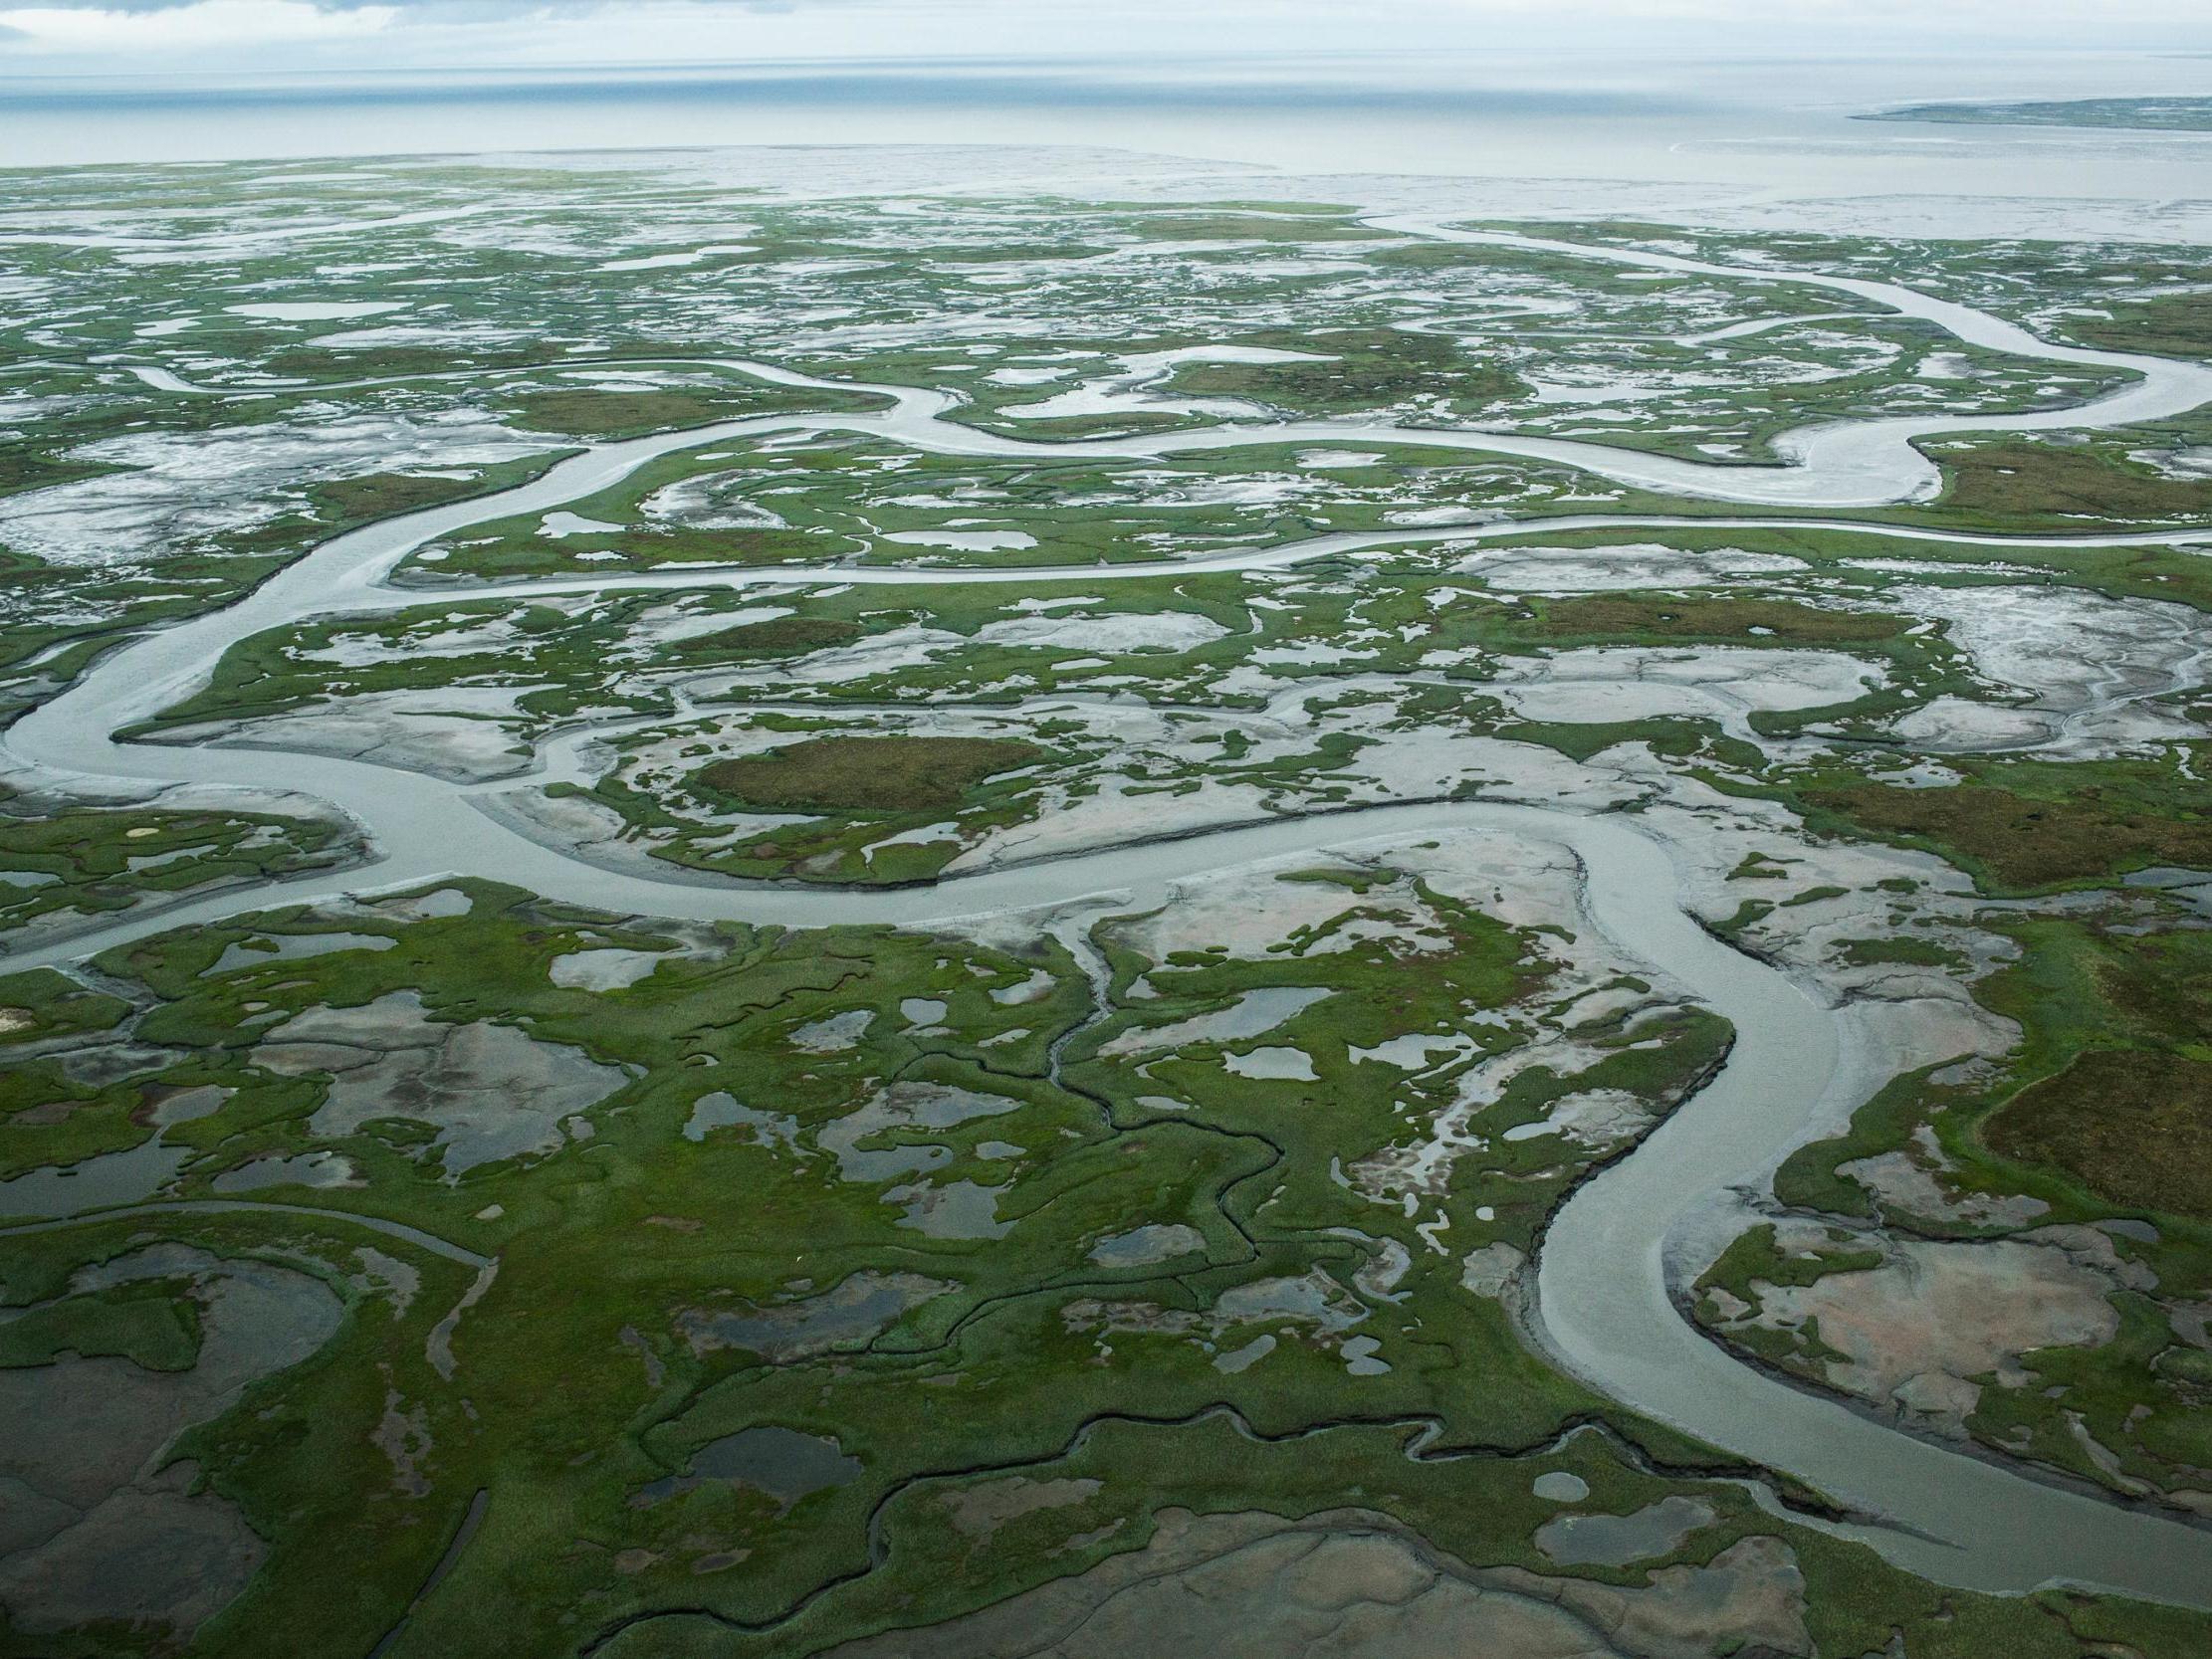 Melting permafrost in Alaska caused by rising global temperatures.